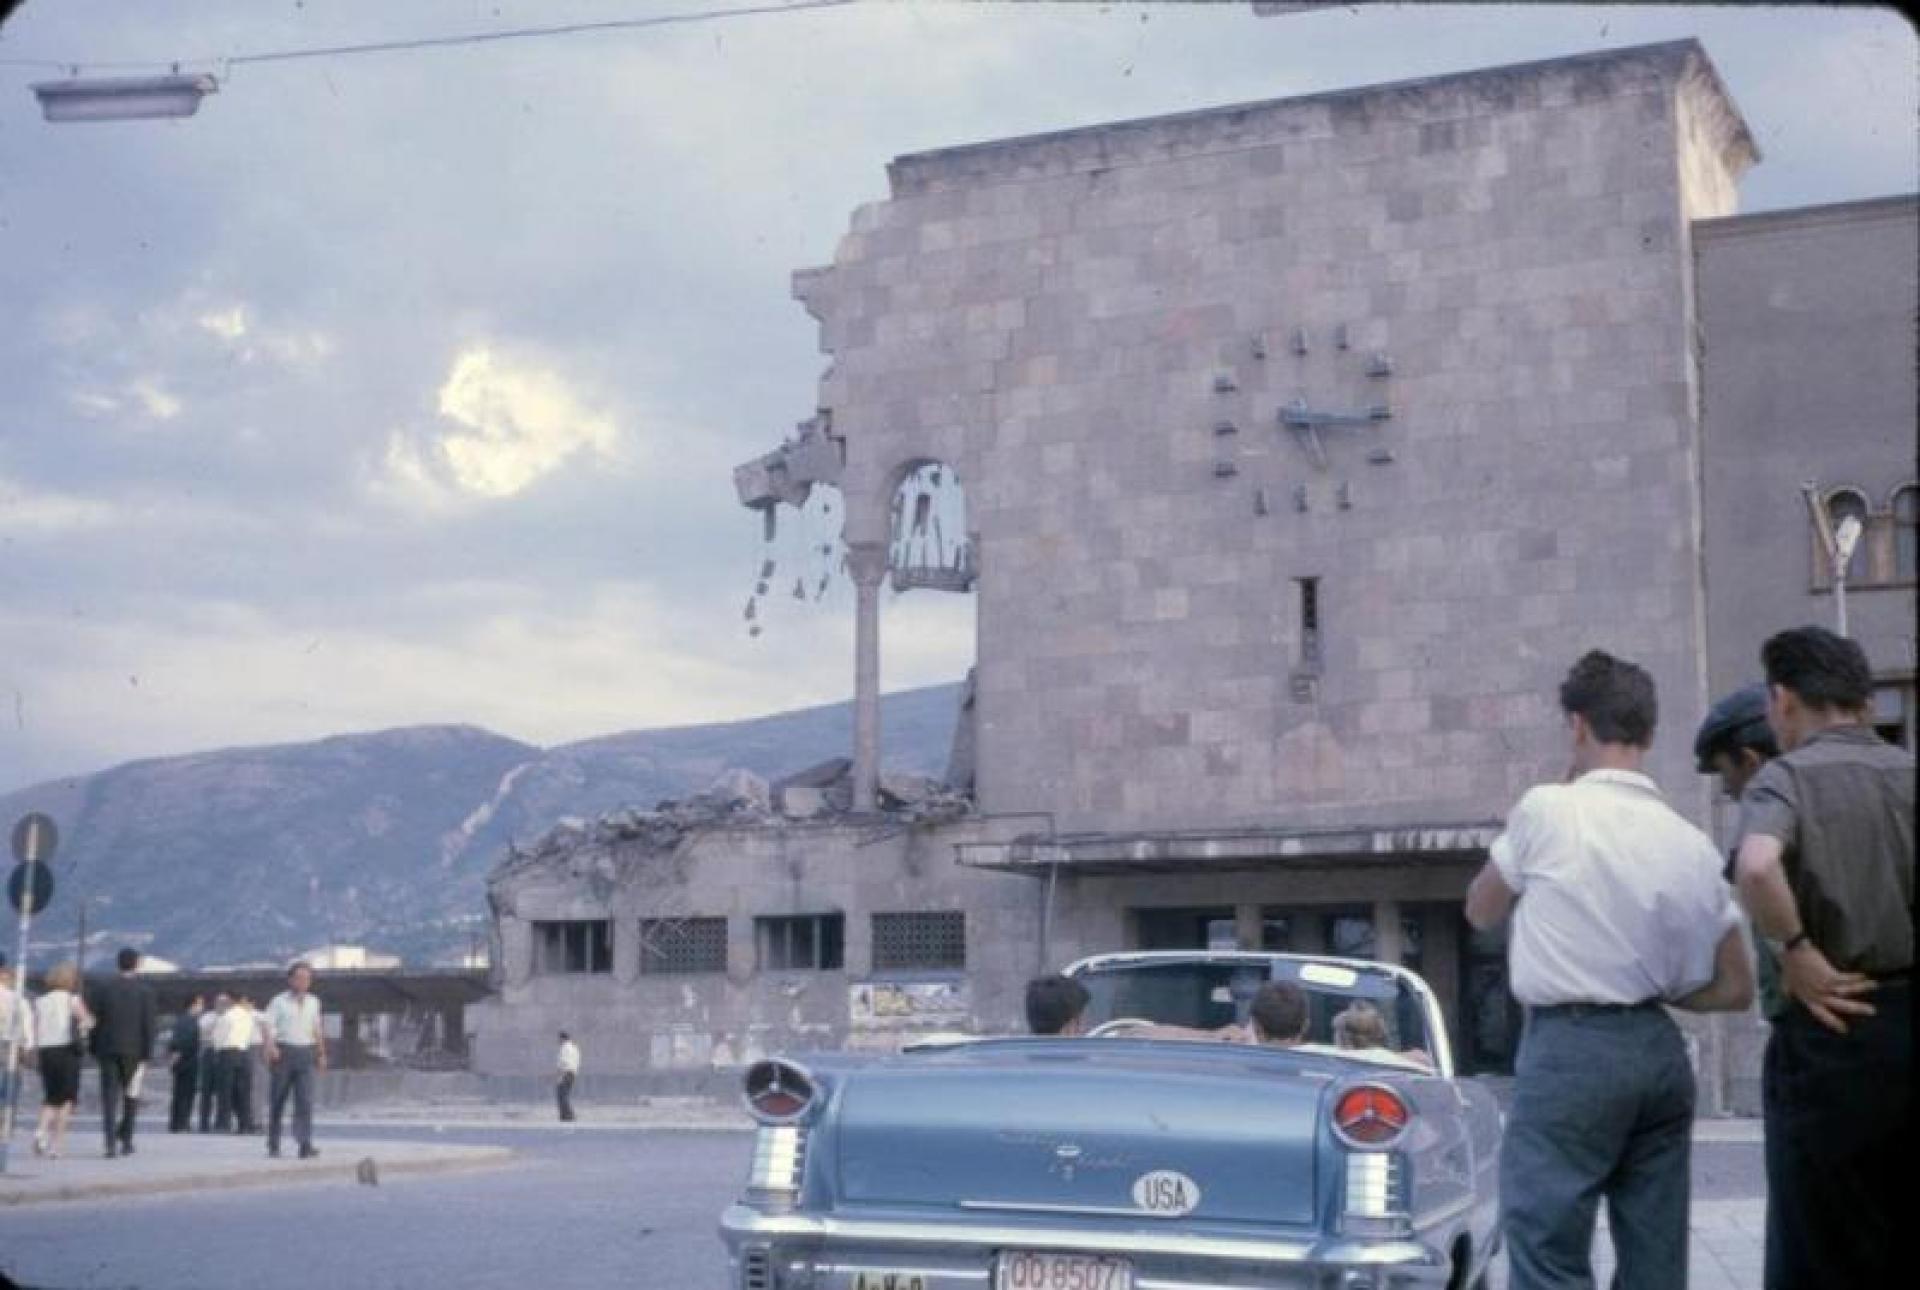 Skopje railway station was destroyed during the earthquake in 1963. The clock stopped at 5:17am when the first wave hit the city. | Photo via Skyscrapercity